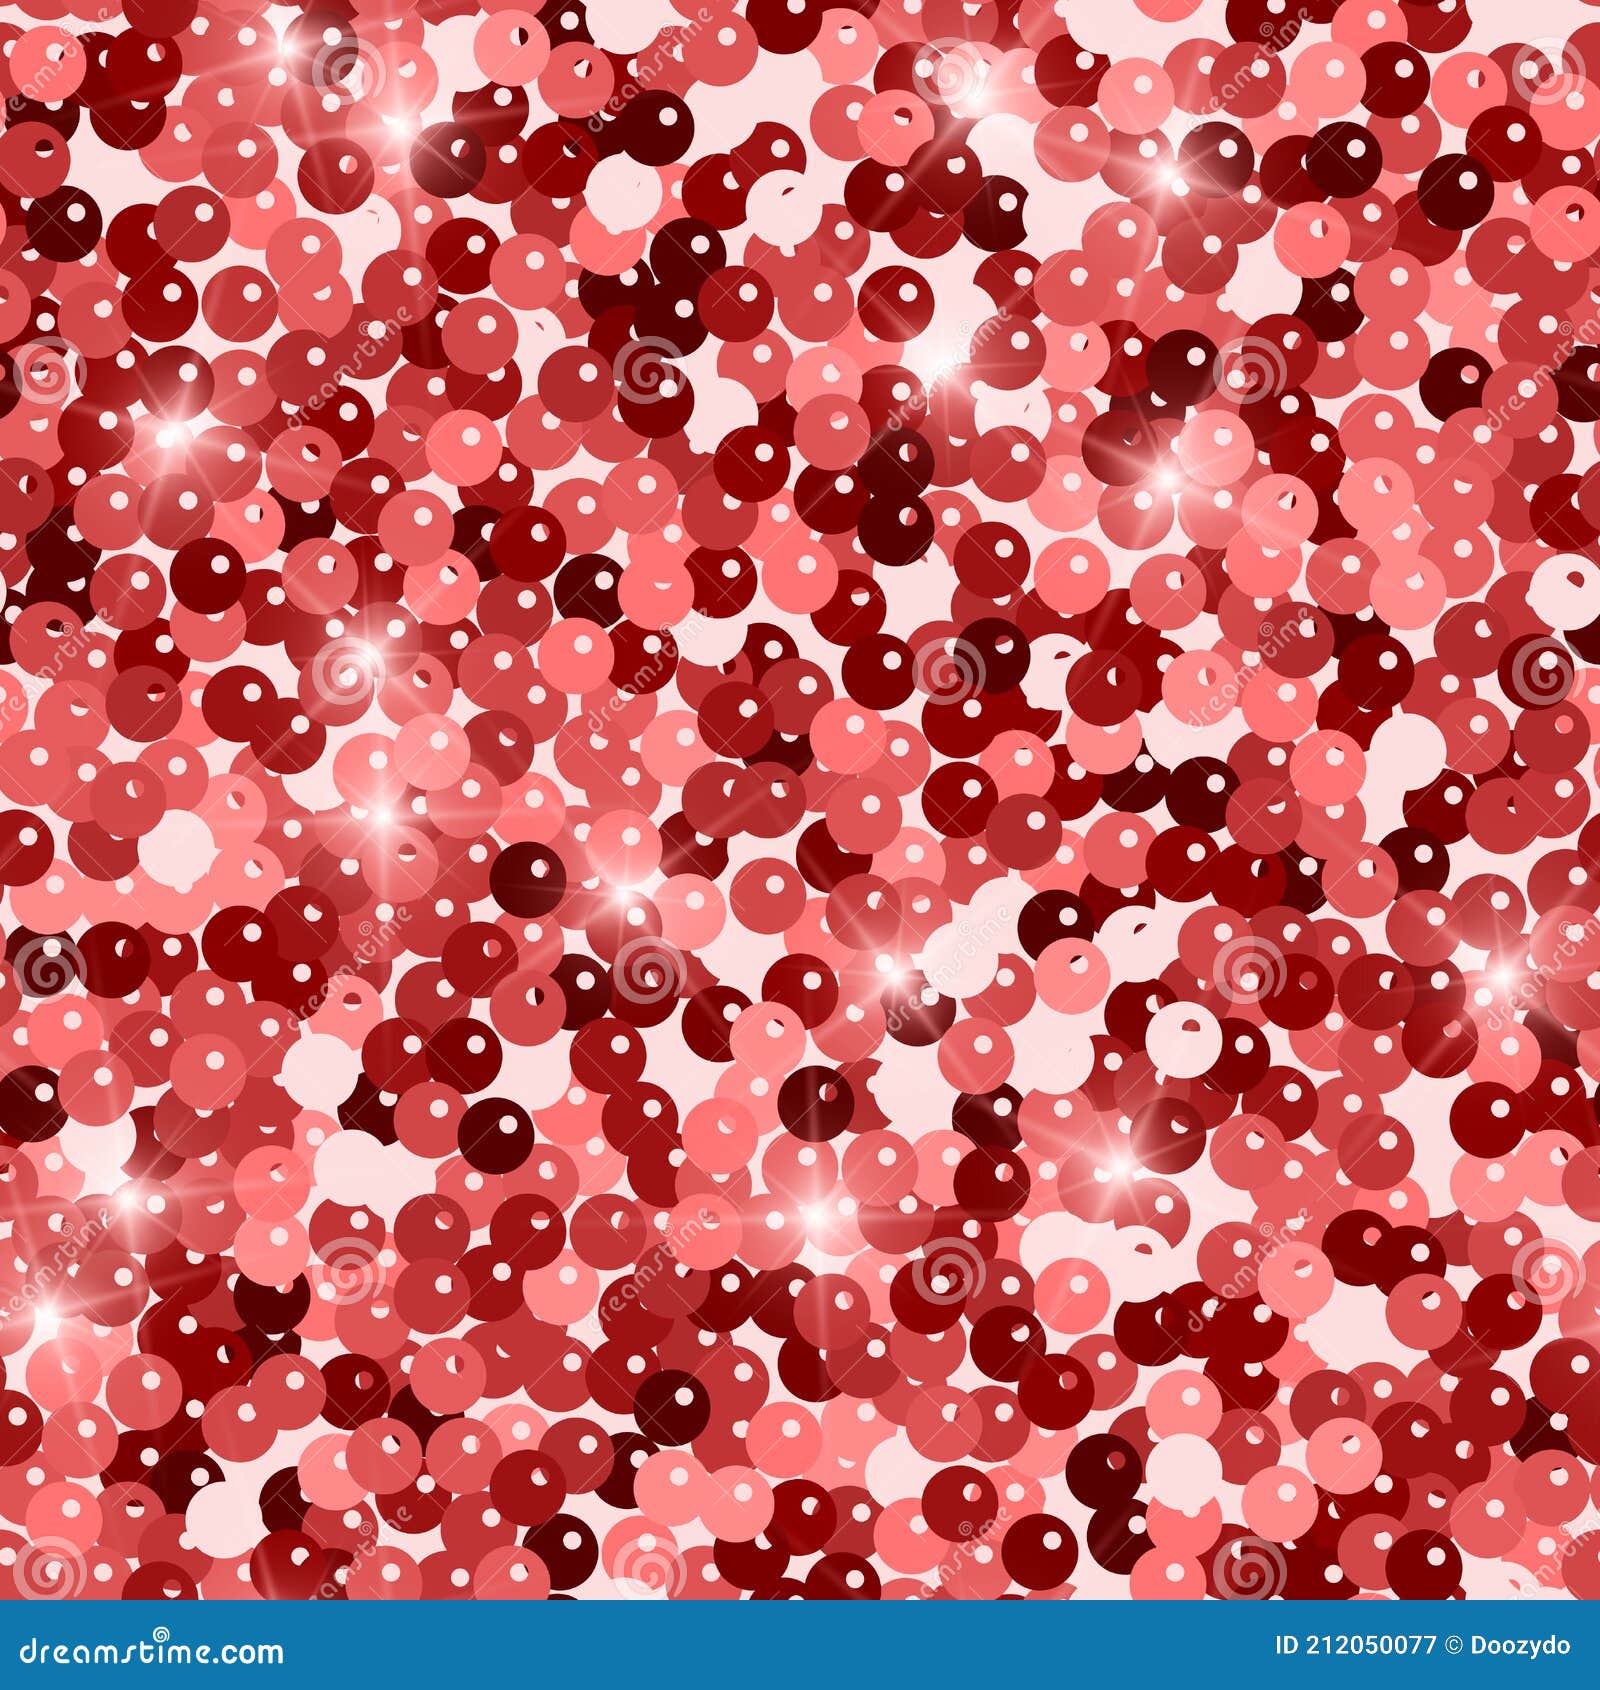 glitter seamless texture. admirable red particles. endless pattern made of sparkling spangles. remar